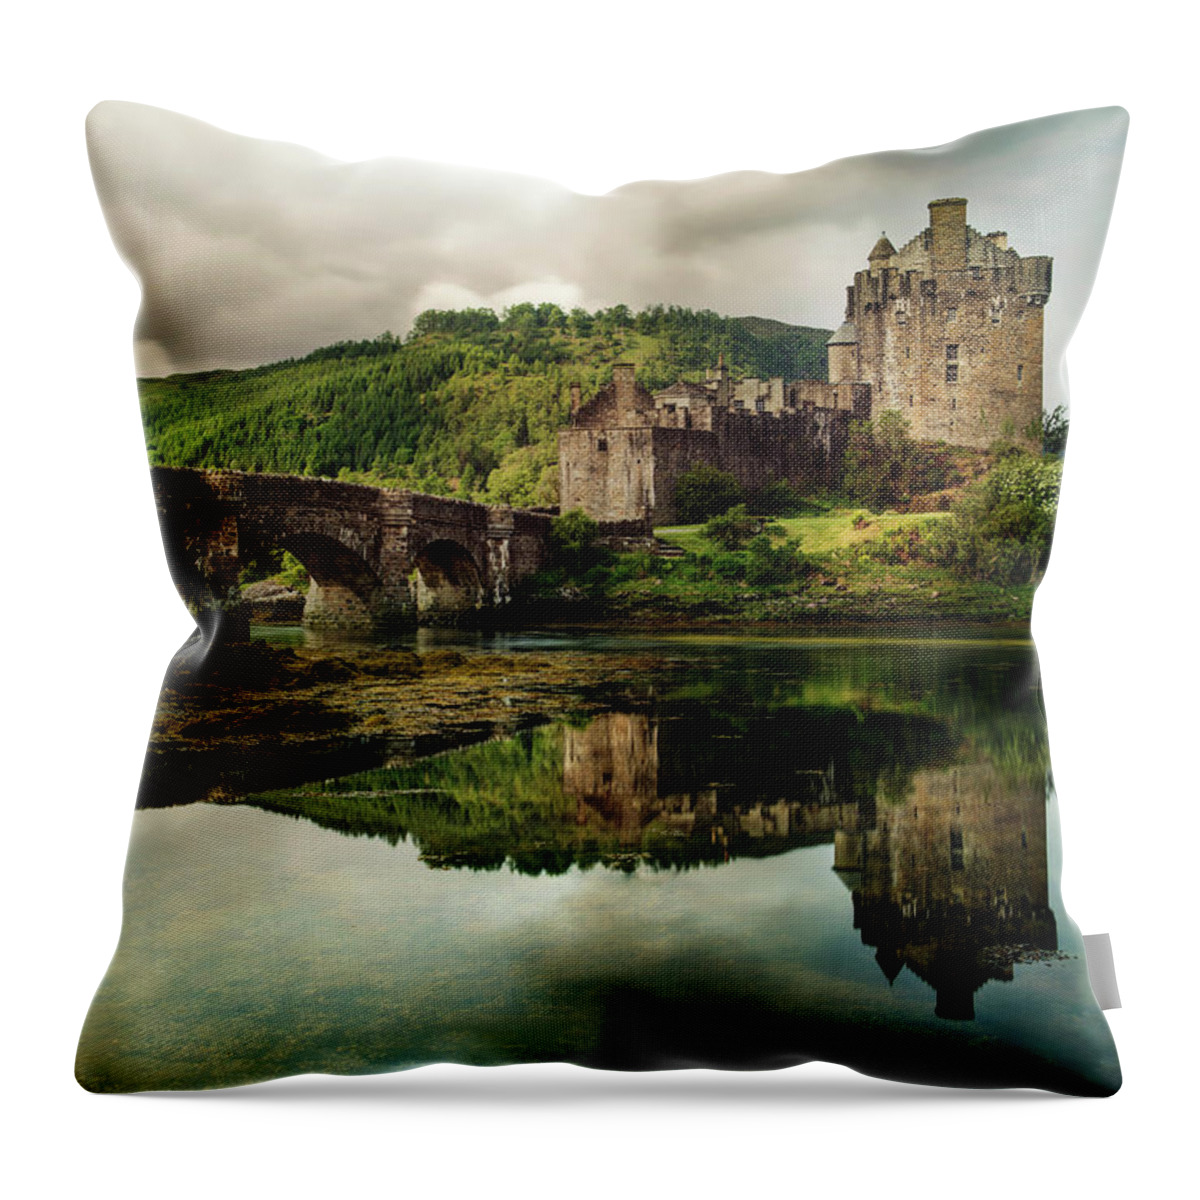 Landscape Throw Pillow featuring the photograph Landscape with an old castle by Jaroslaw Blaminsky